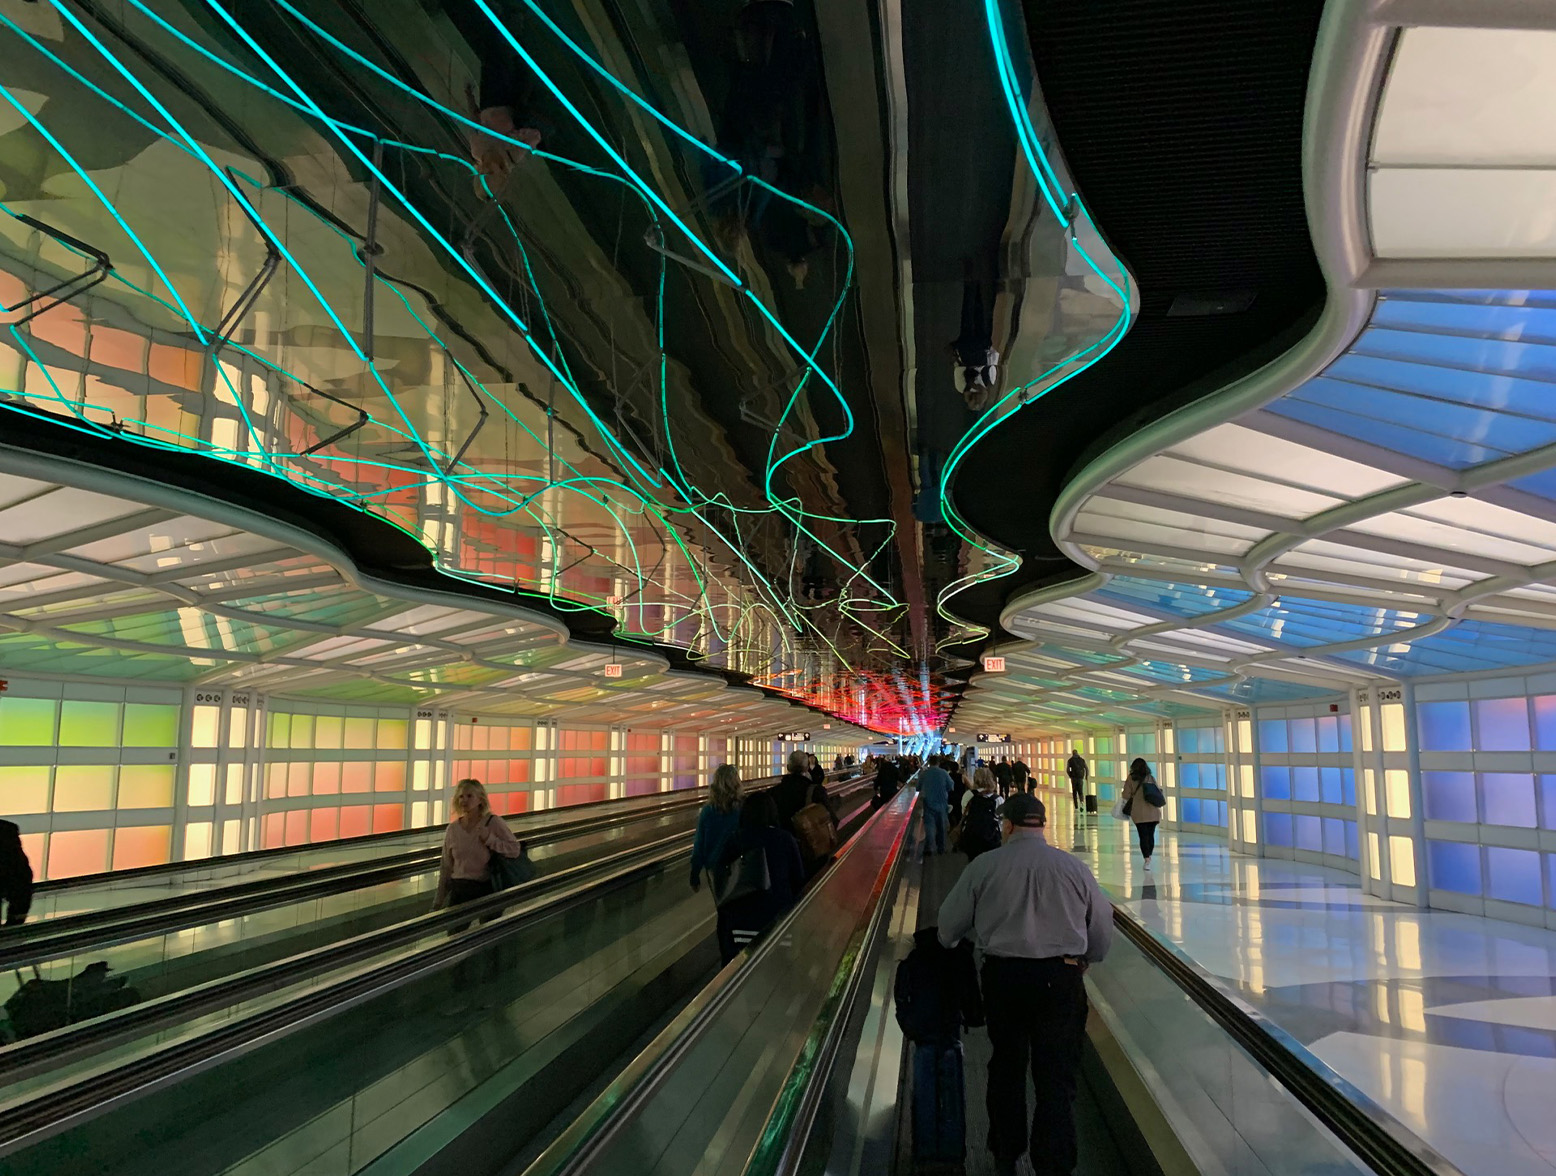 Tunnel of Lights at Chicago O'hare